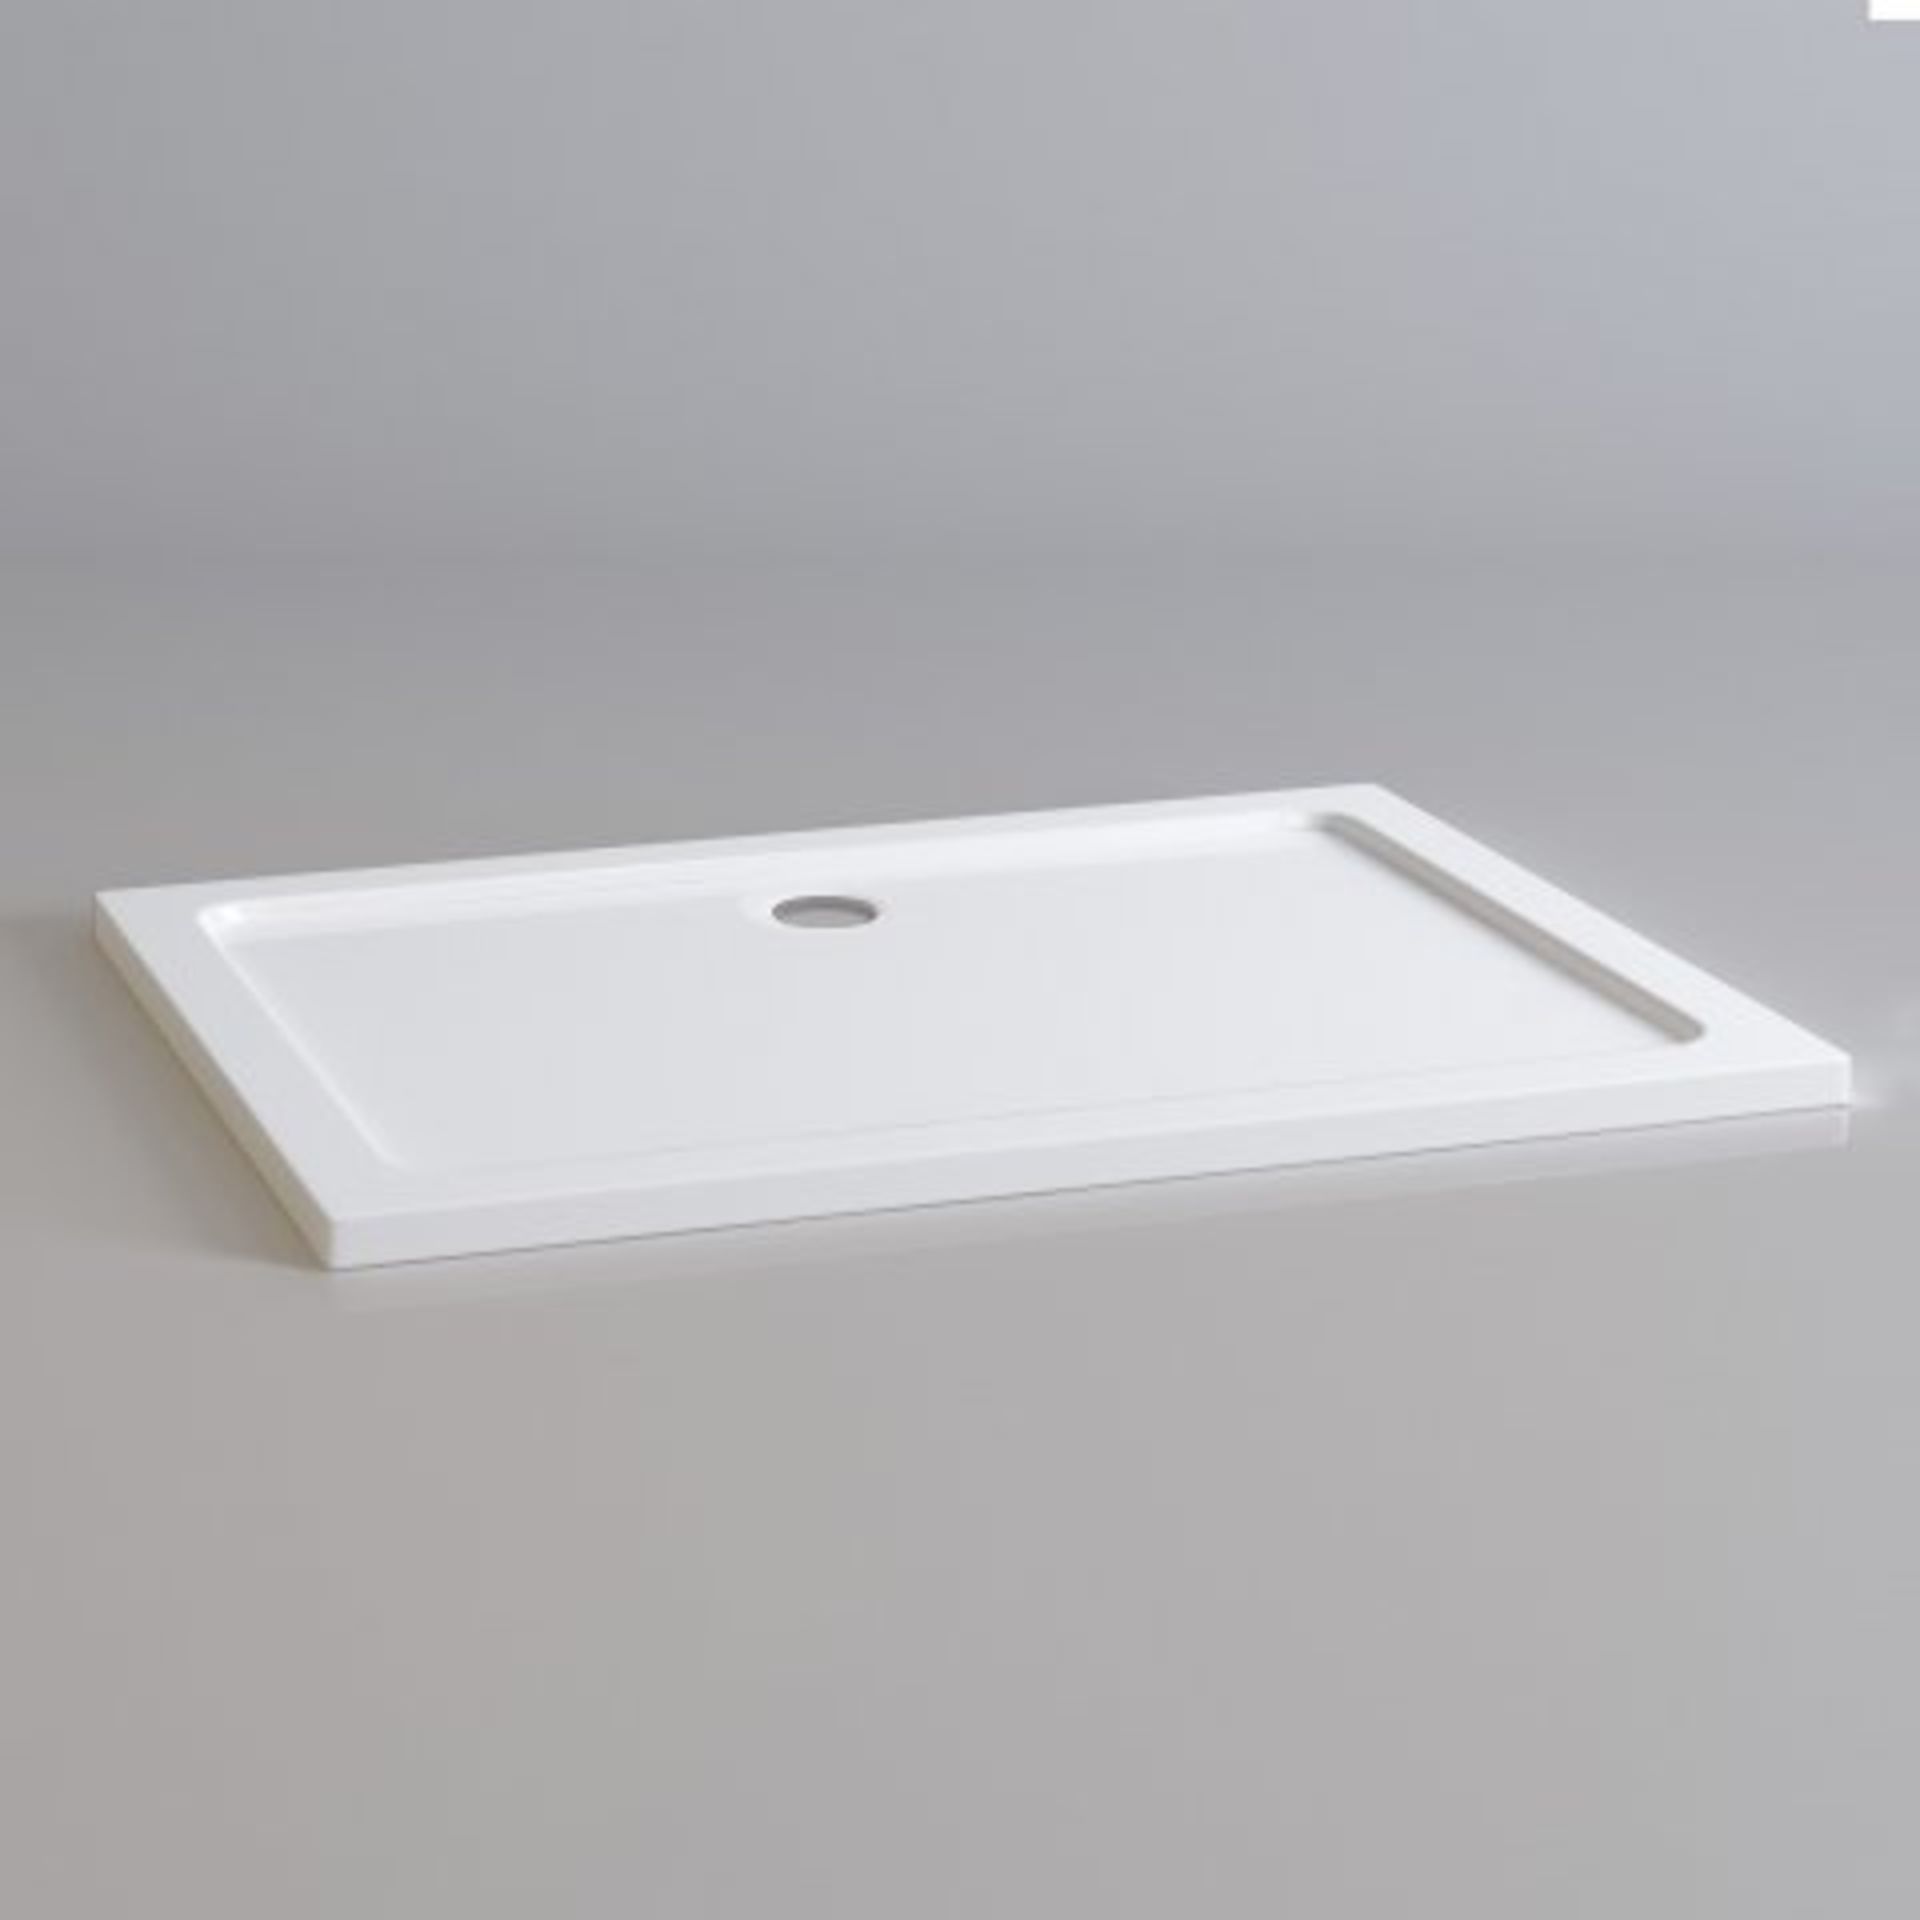 NEW 1200x900mm Rectangular Ultra Slim Stone Shower Tray.RRP £399.99.Our brilliant white trays ... - Image 2 of 2